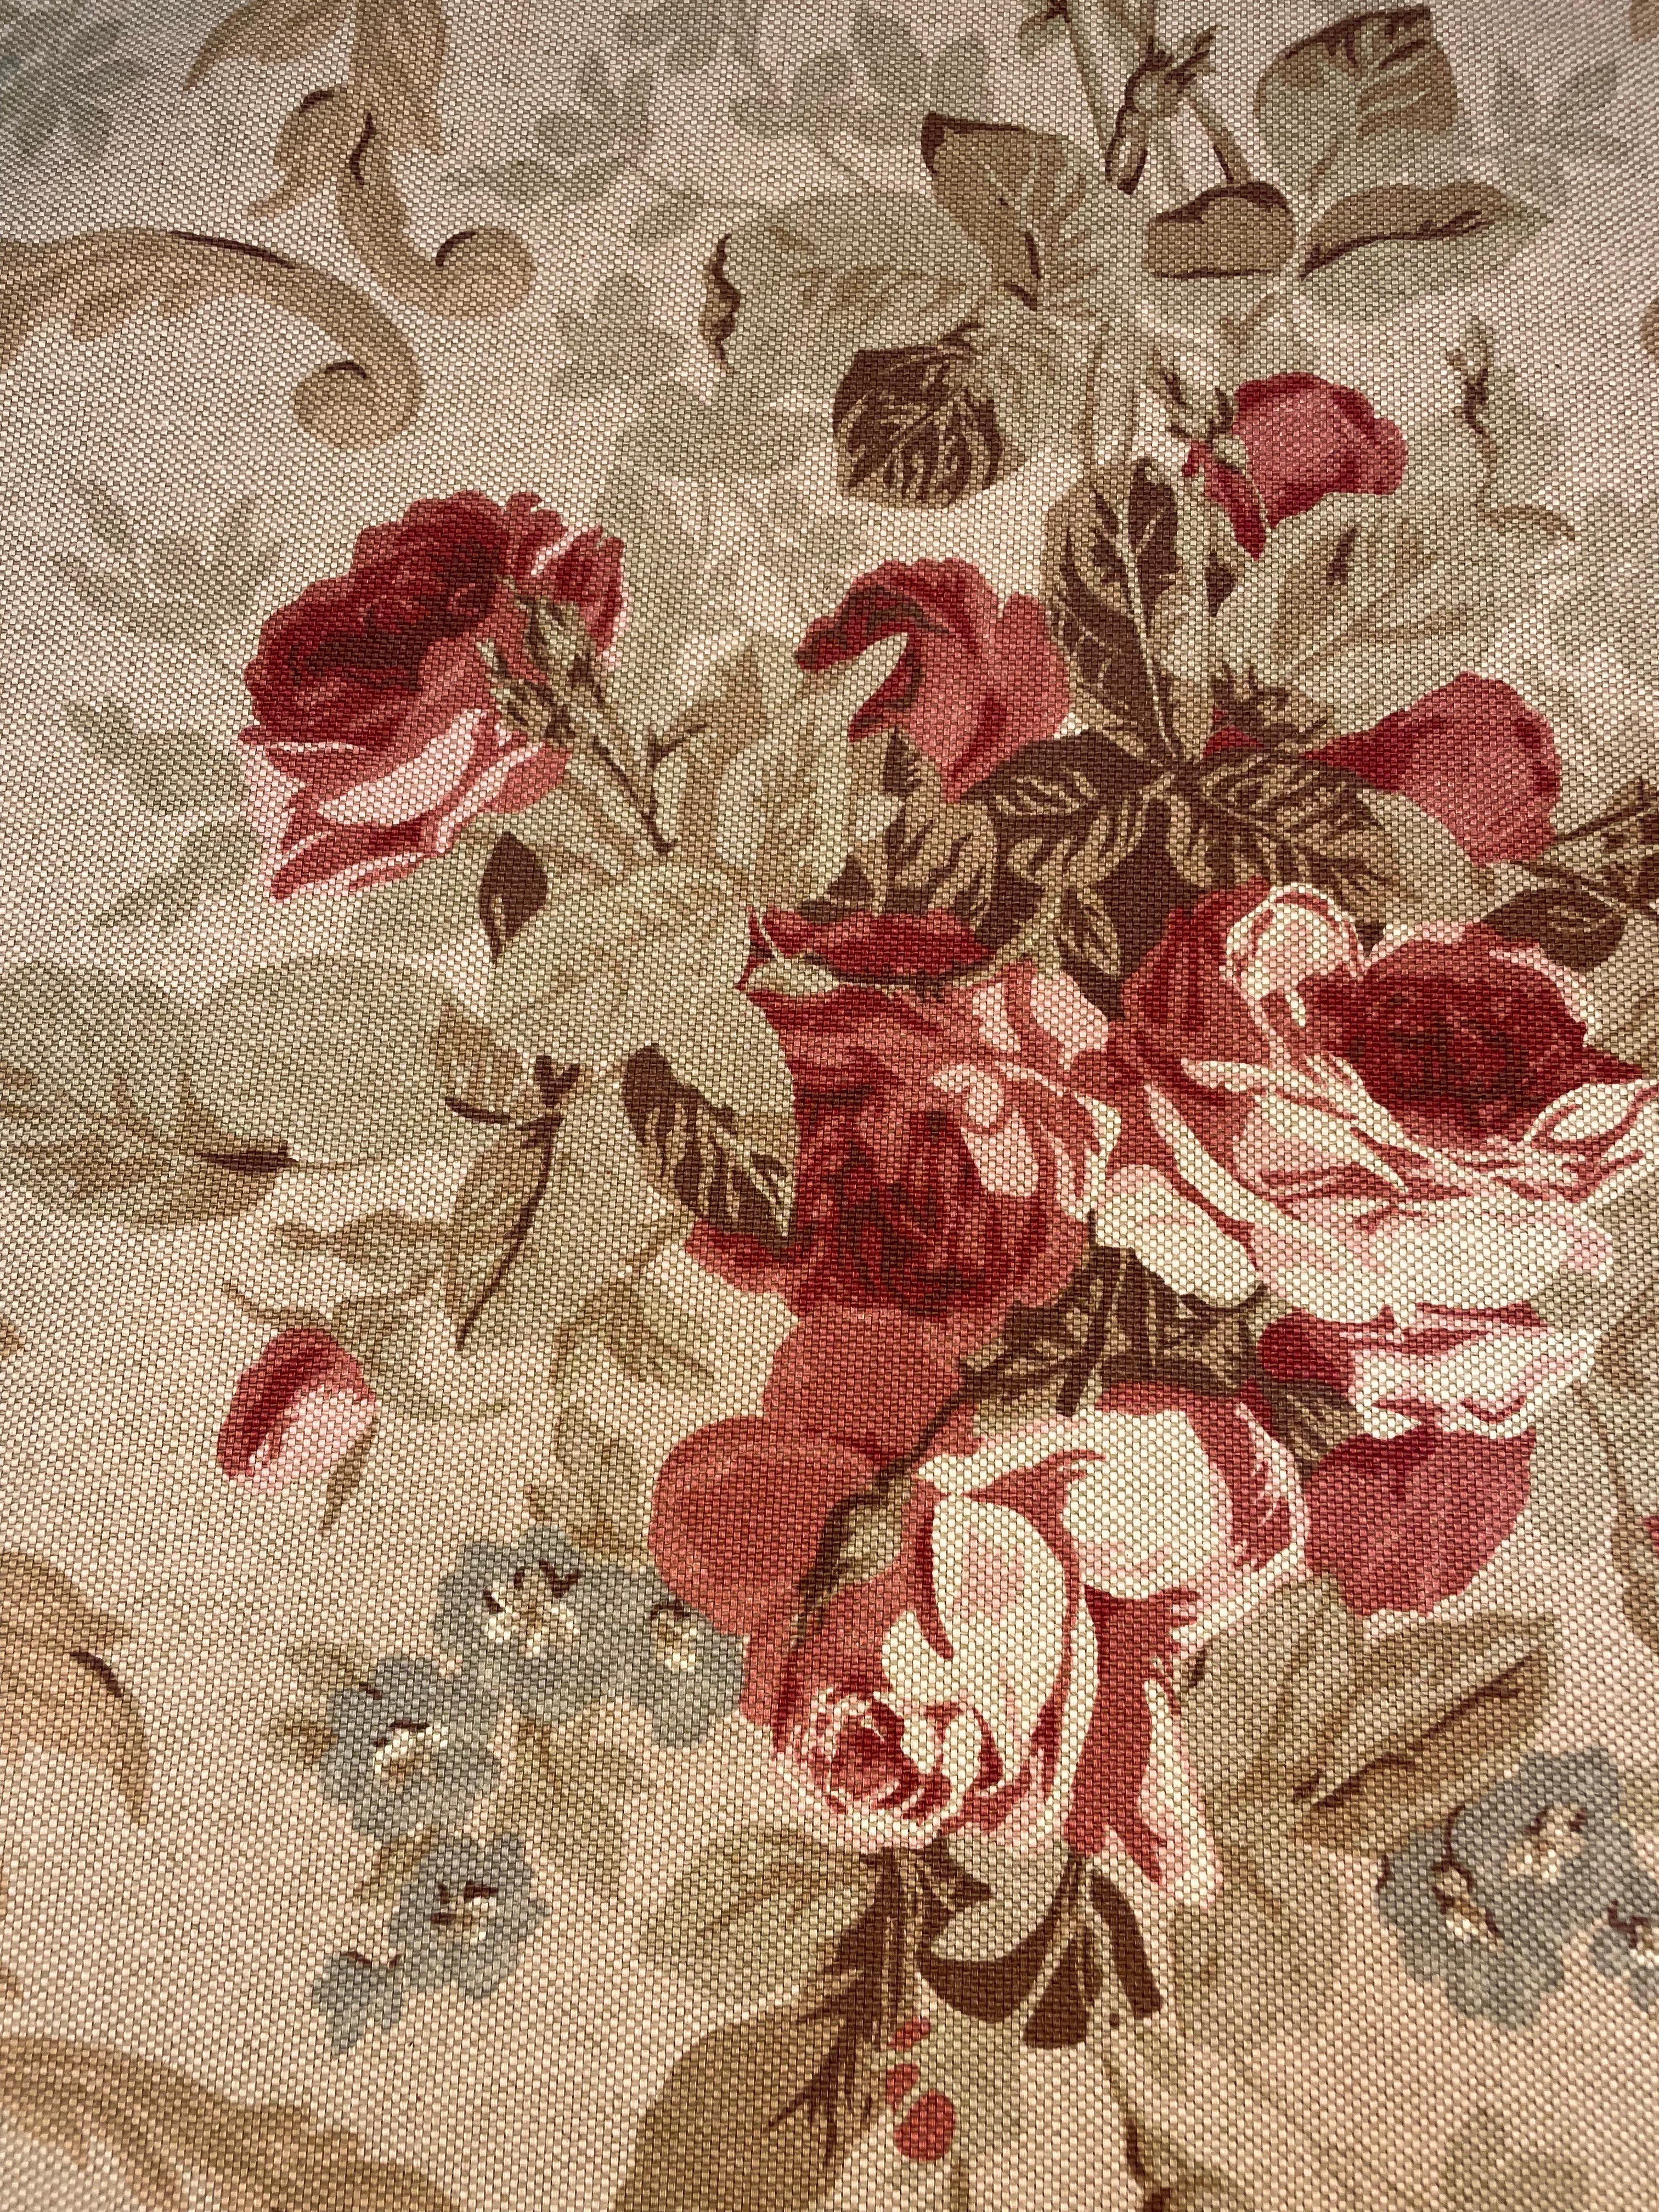 Cottage Rose Fabric by the Yard